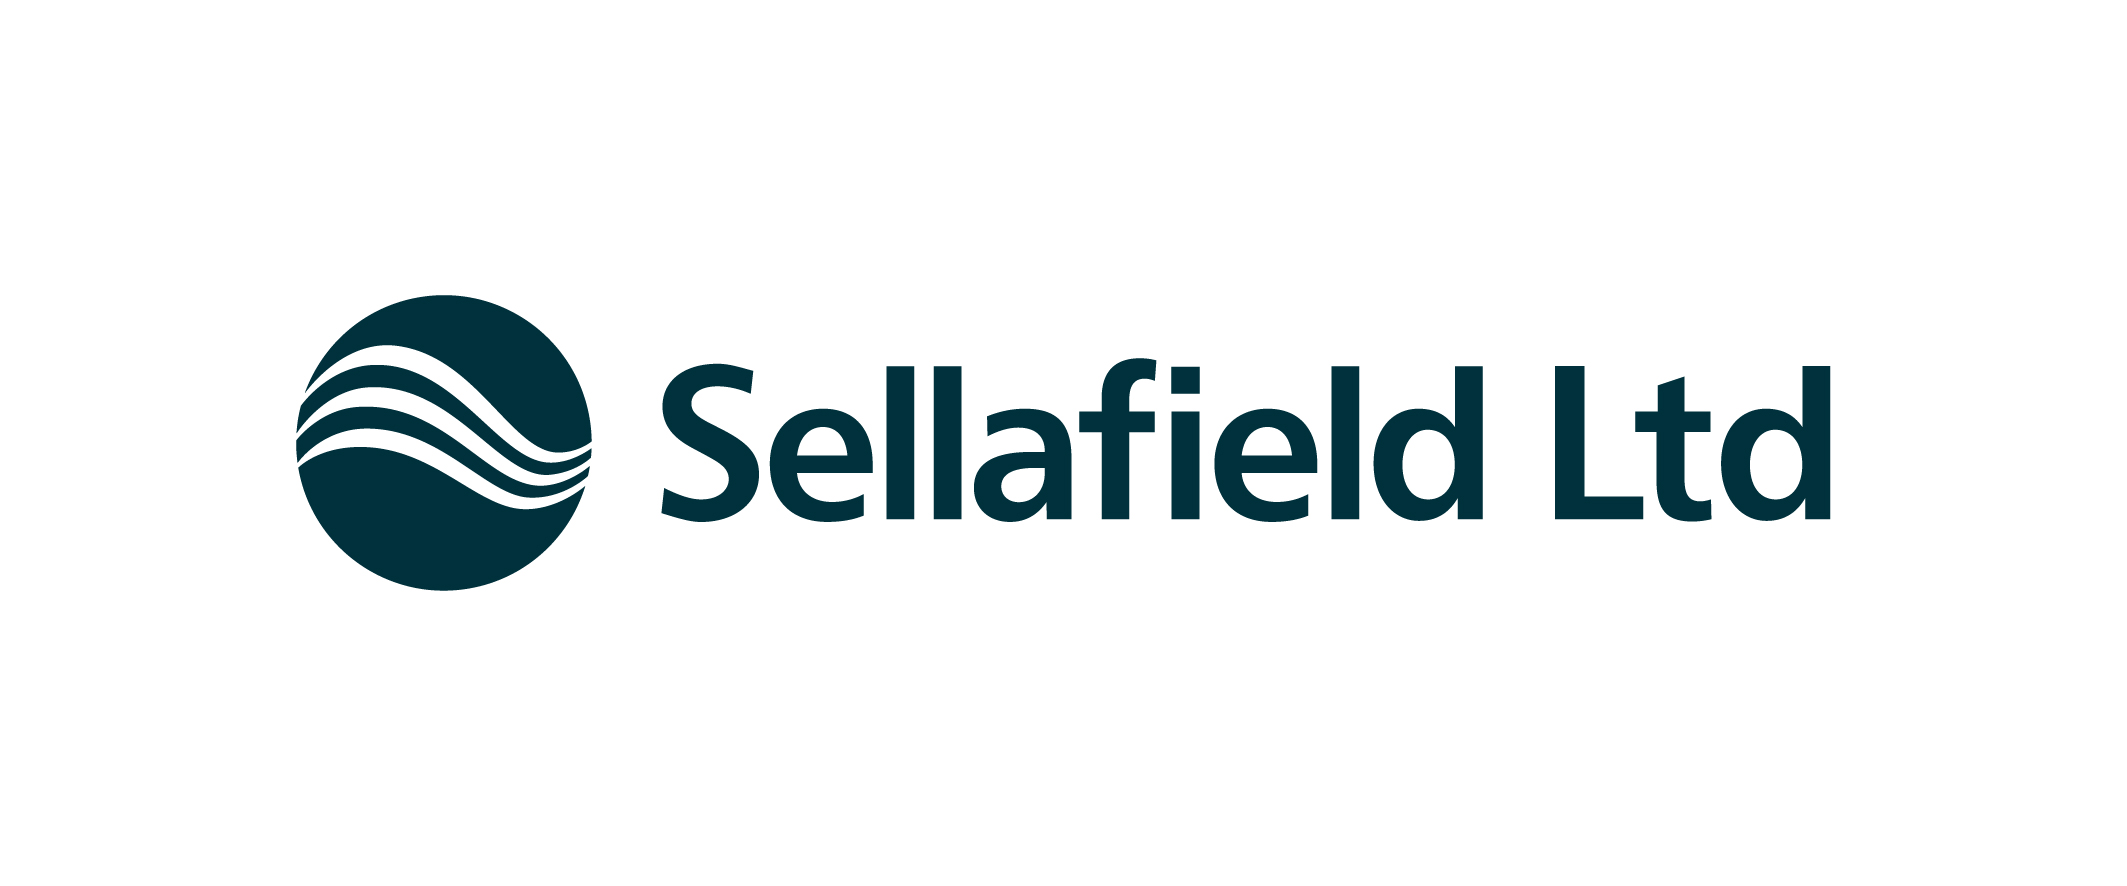 Sellafield Ltd Signs Up For Armed Forces Expo Catterick